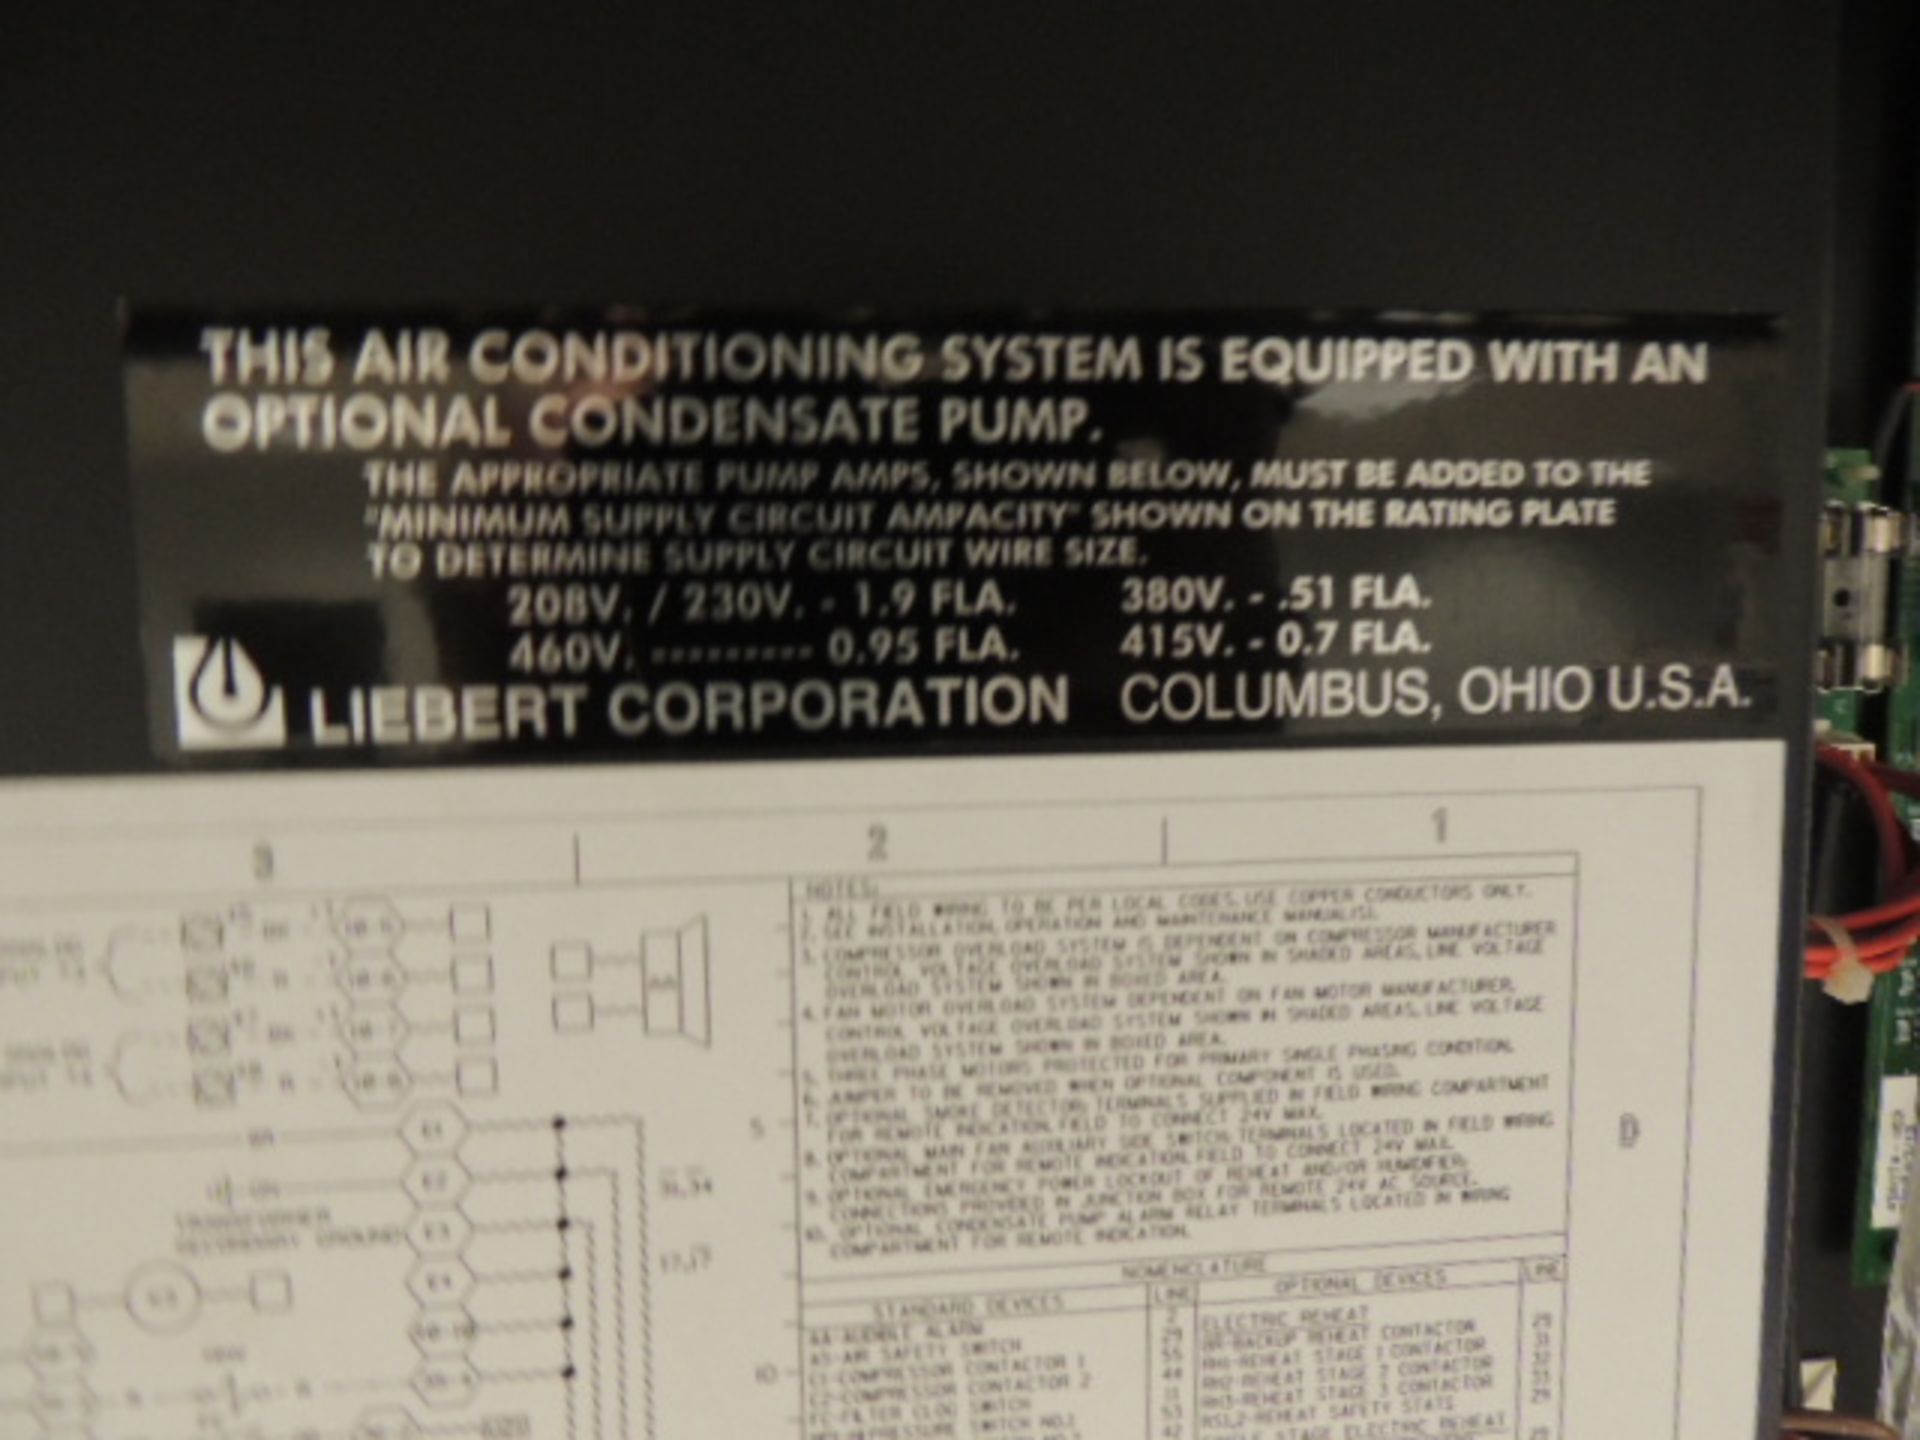 Liebert DH290AUAAEI Air conditioning system with a condensate pump, advanced micro processor - Image 7 of 7